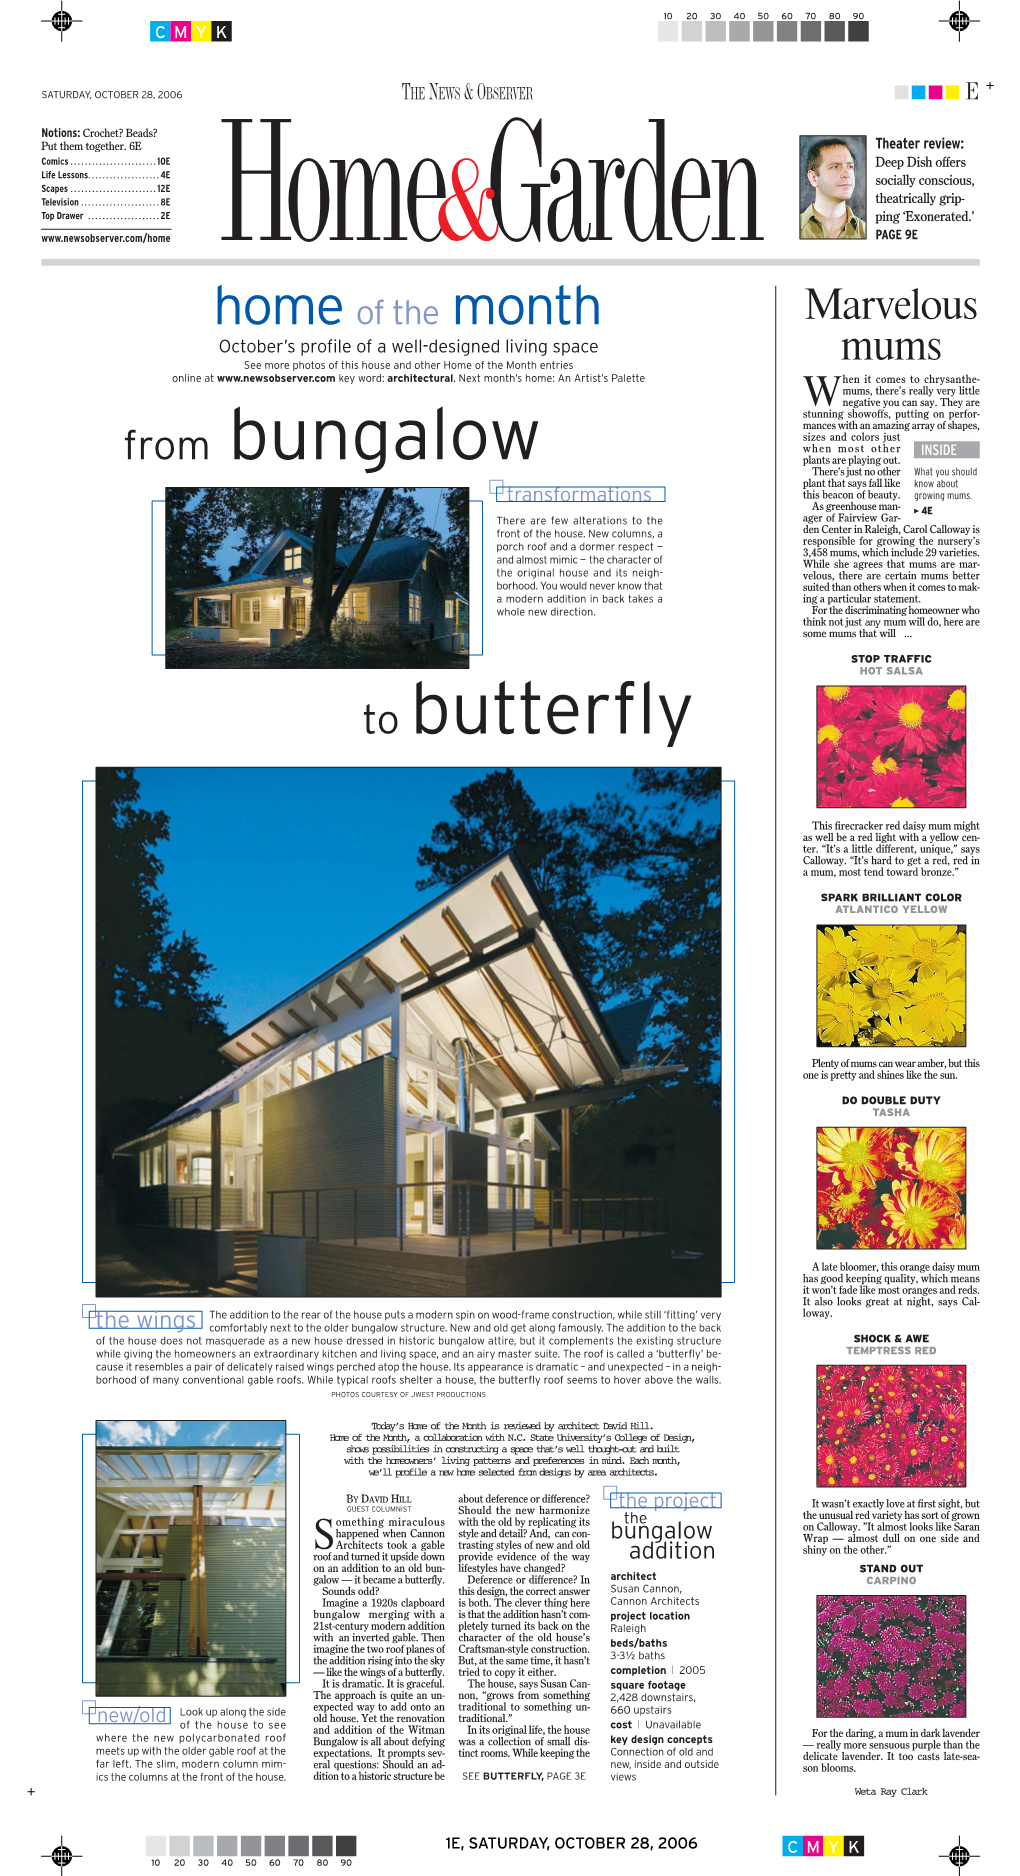 From Bungalow to Butterfly